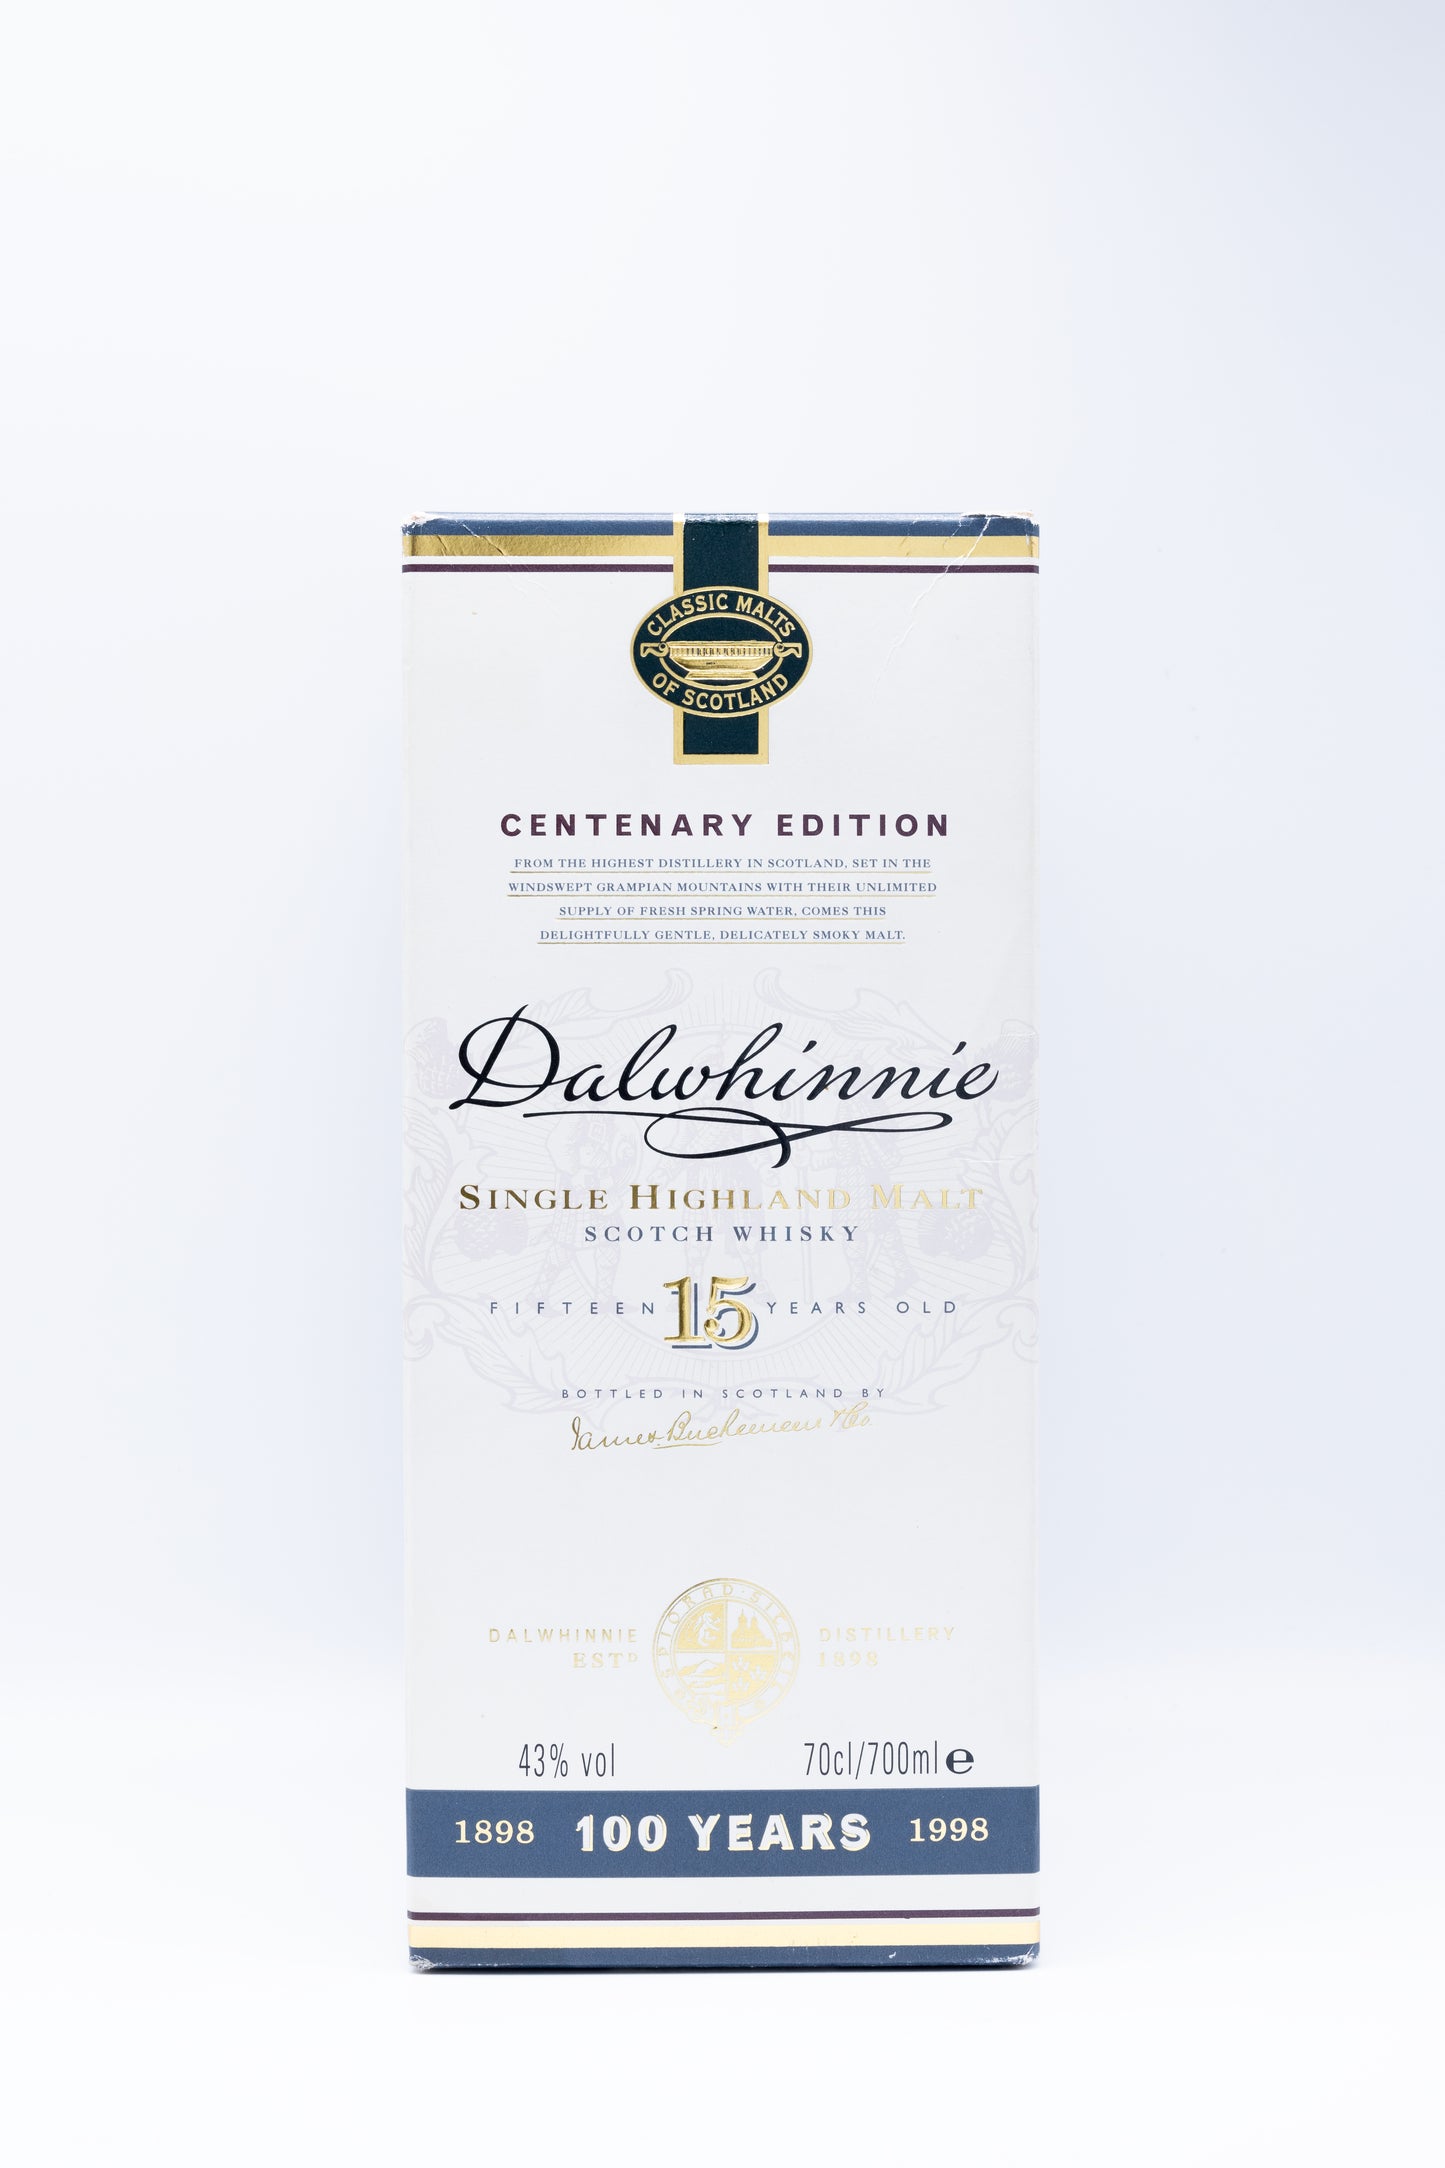 Dalwhinnie 15 year old Centenary Edition